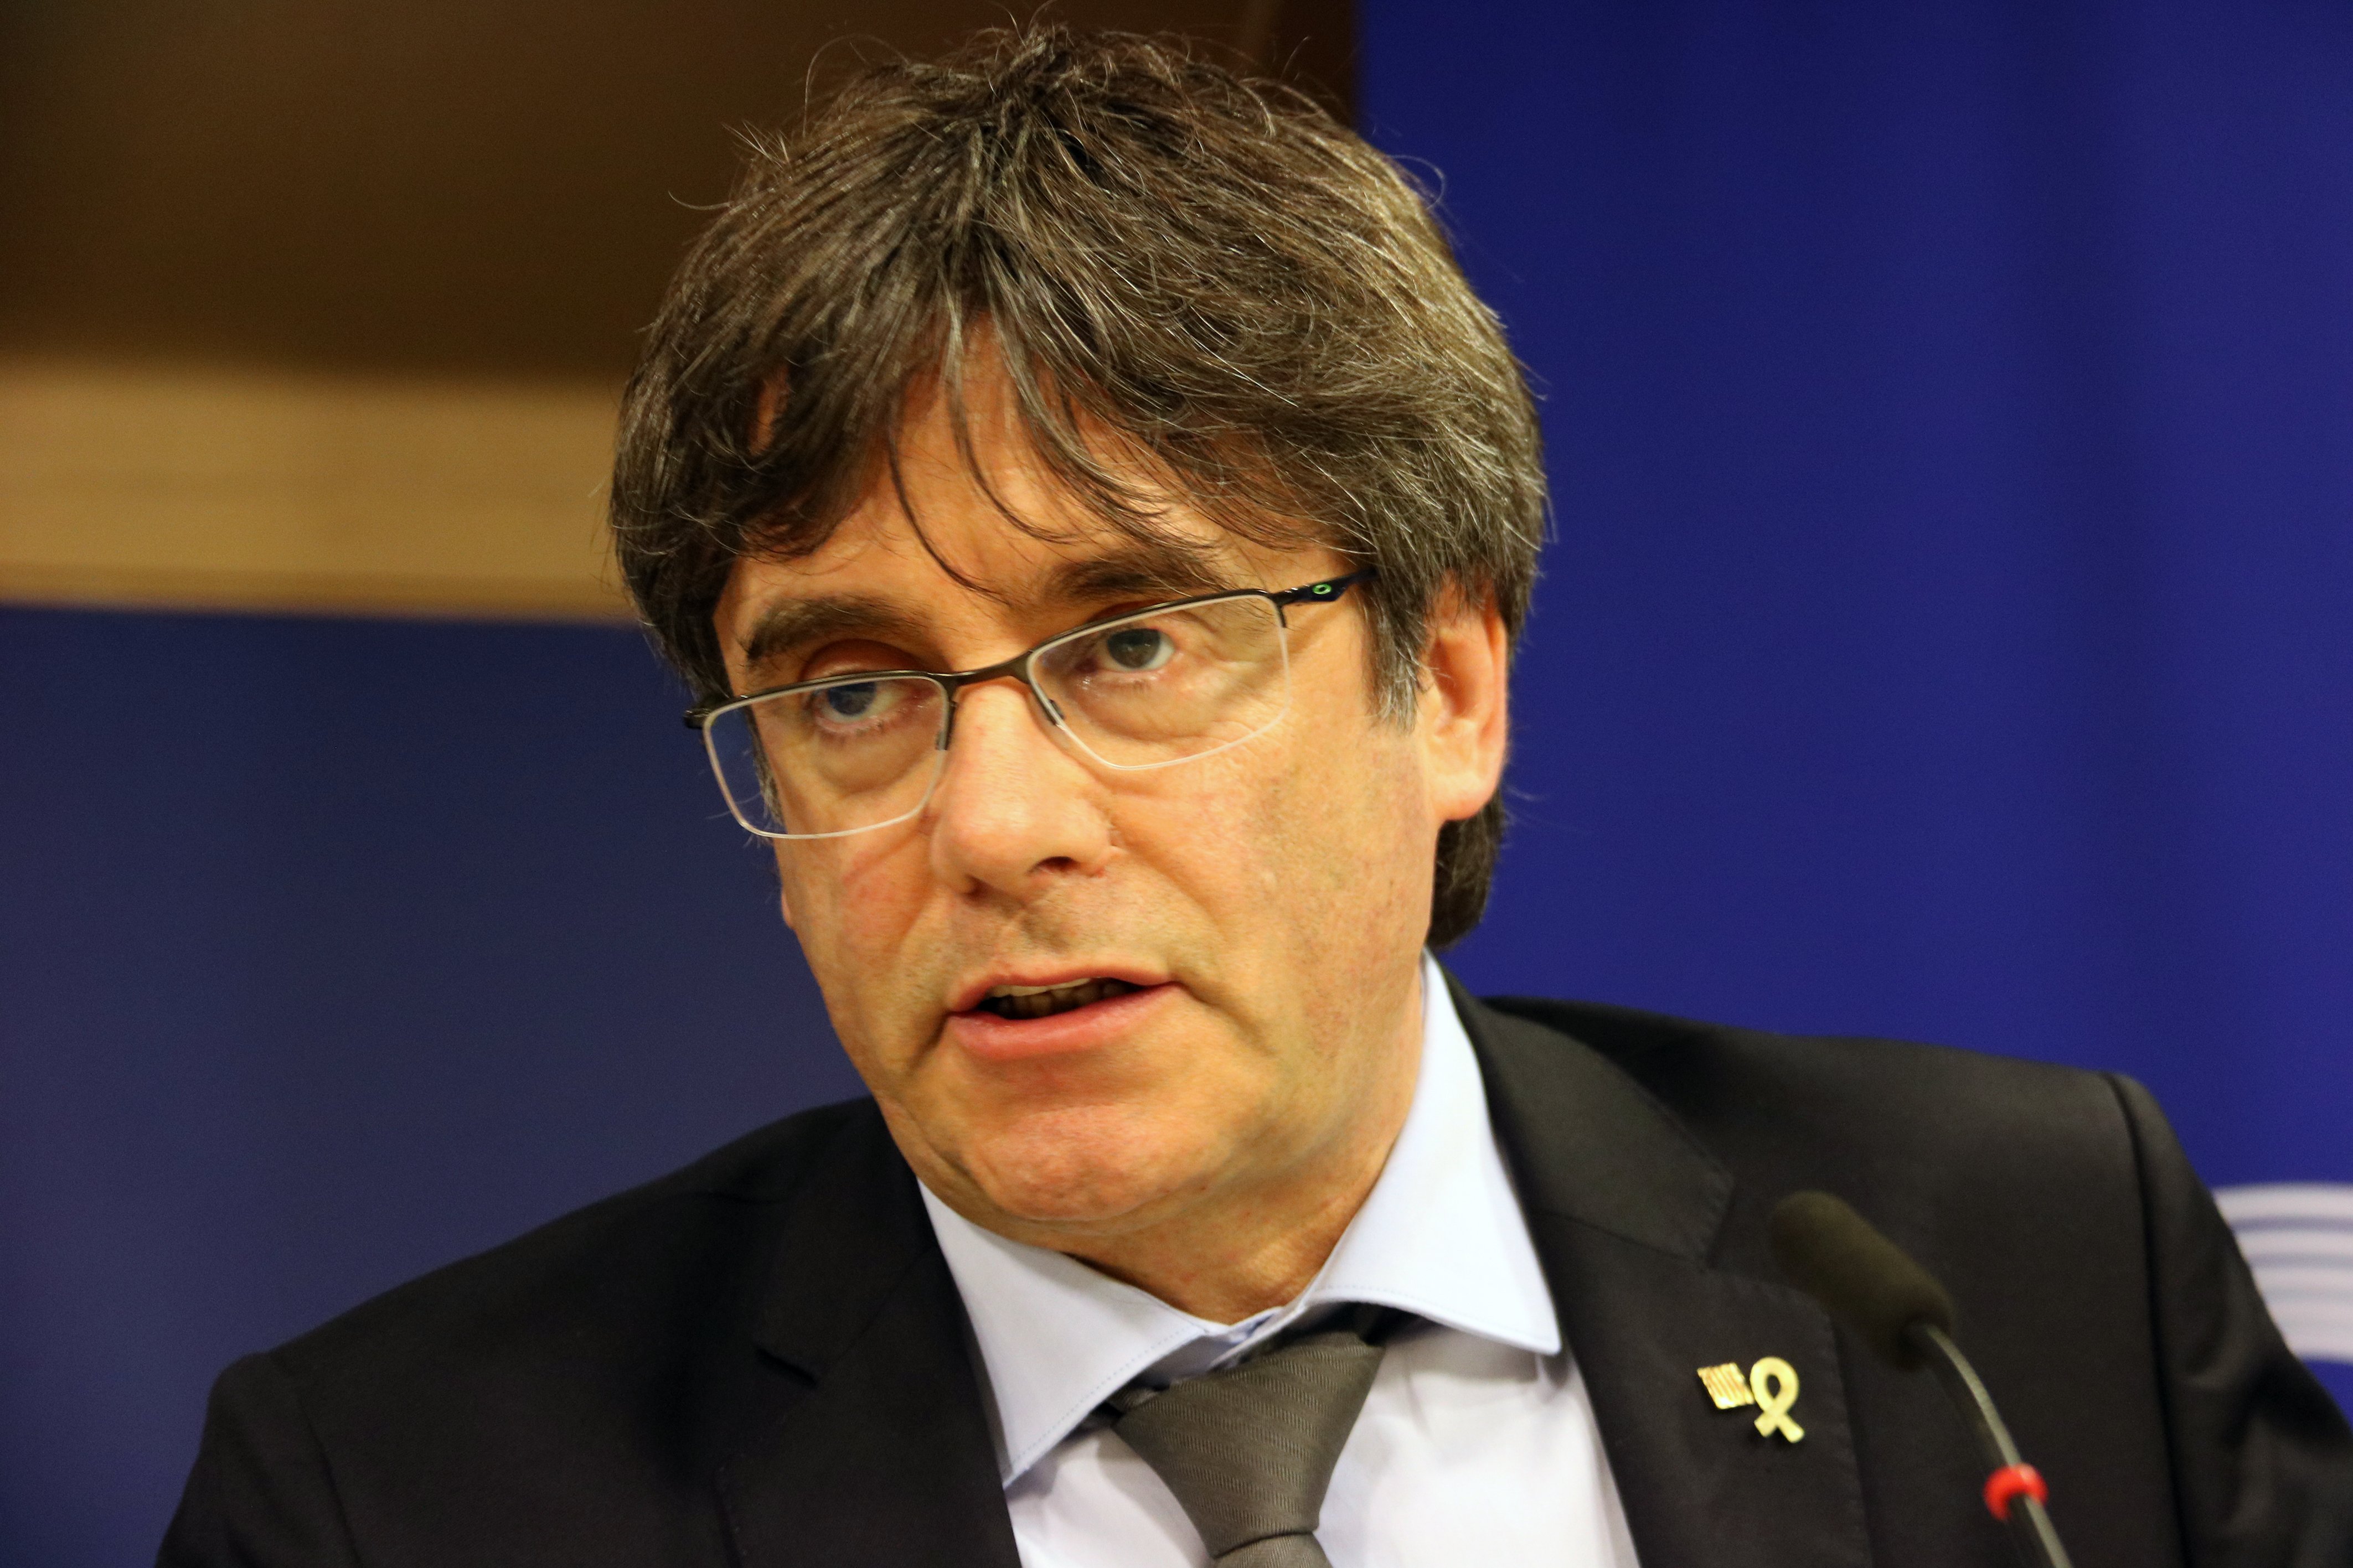 Puigdemont complains to Supreme Court it's breaking its own rules